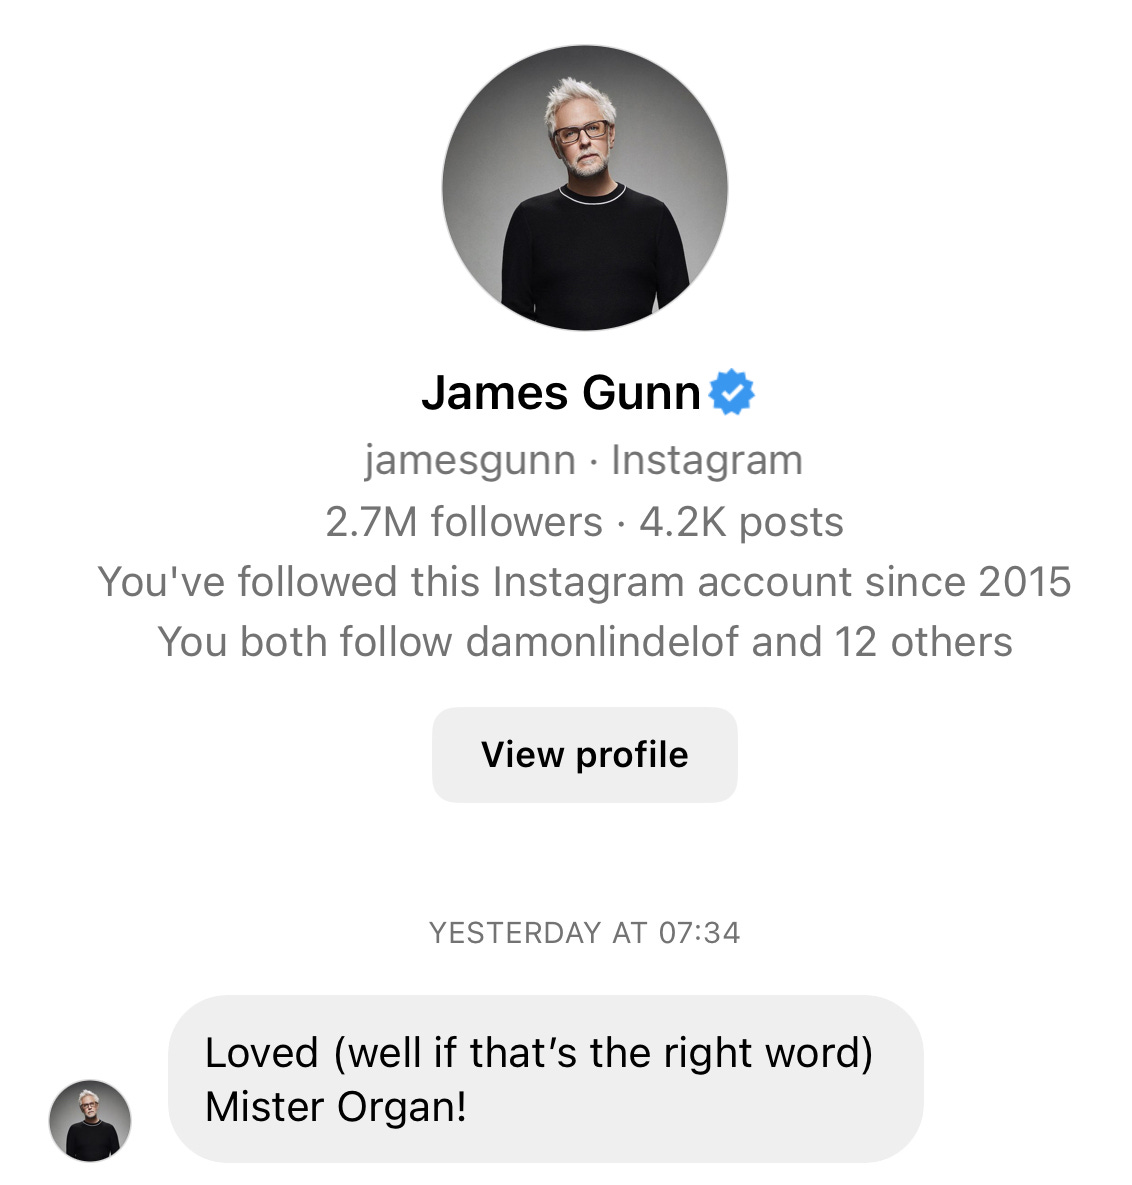 James Gunn slides into my DMs saying "Loved (well if that's the right word) Mister Organ!